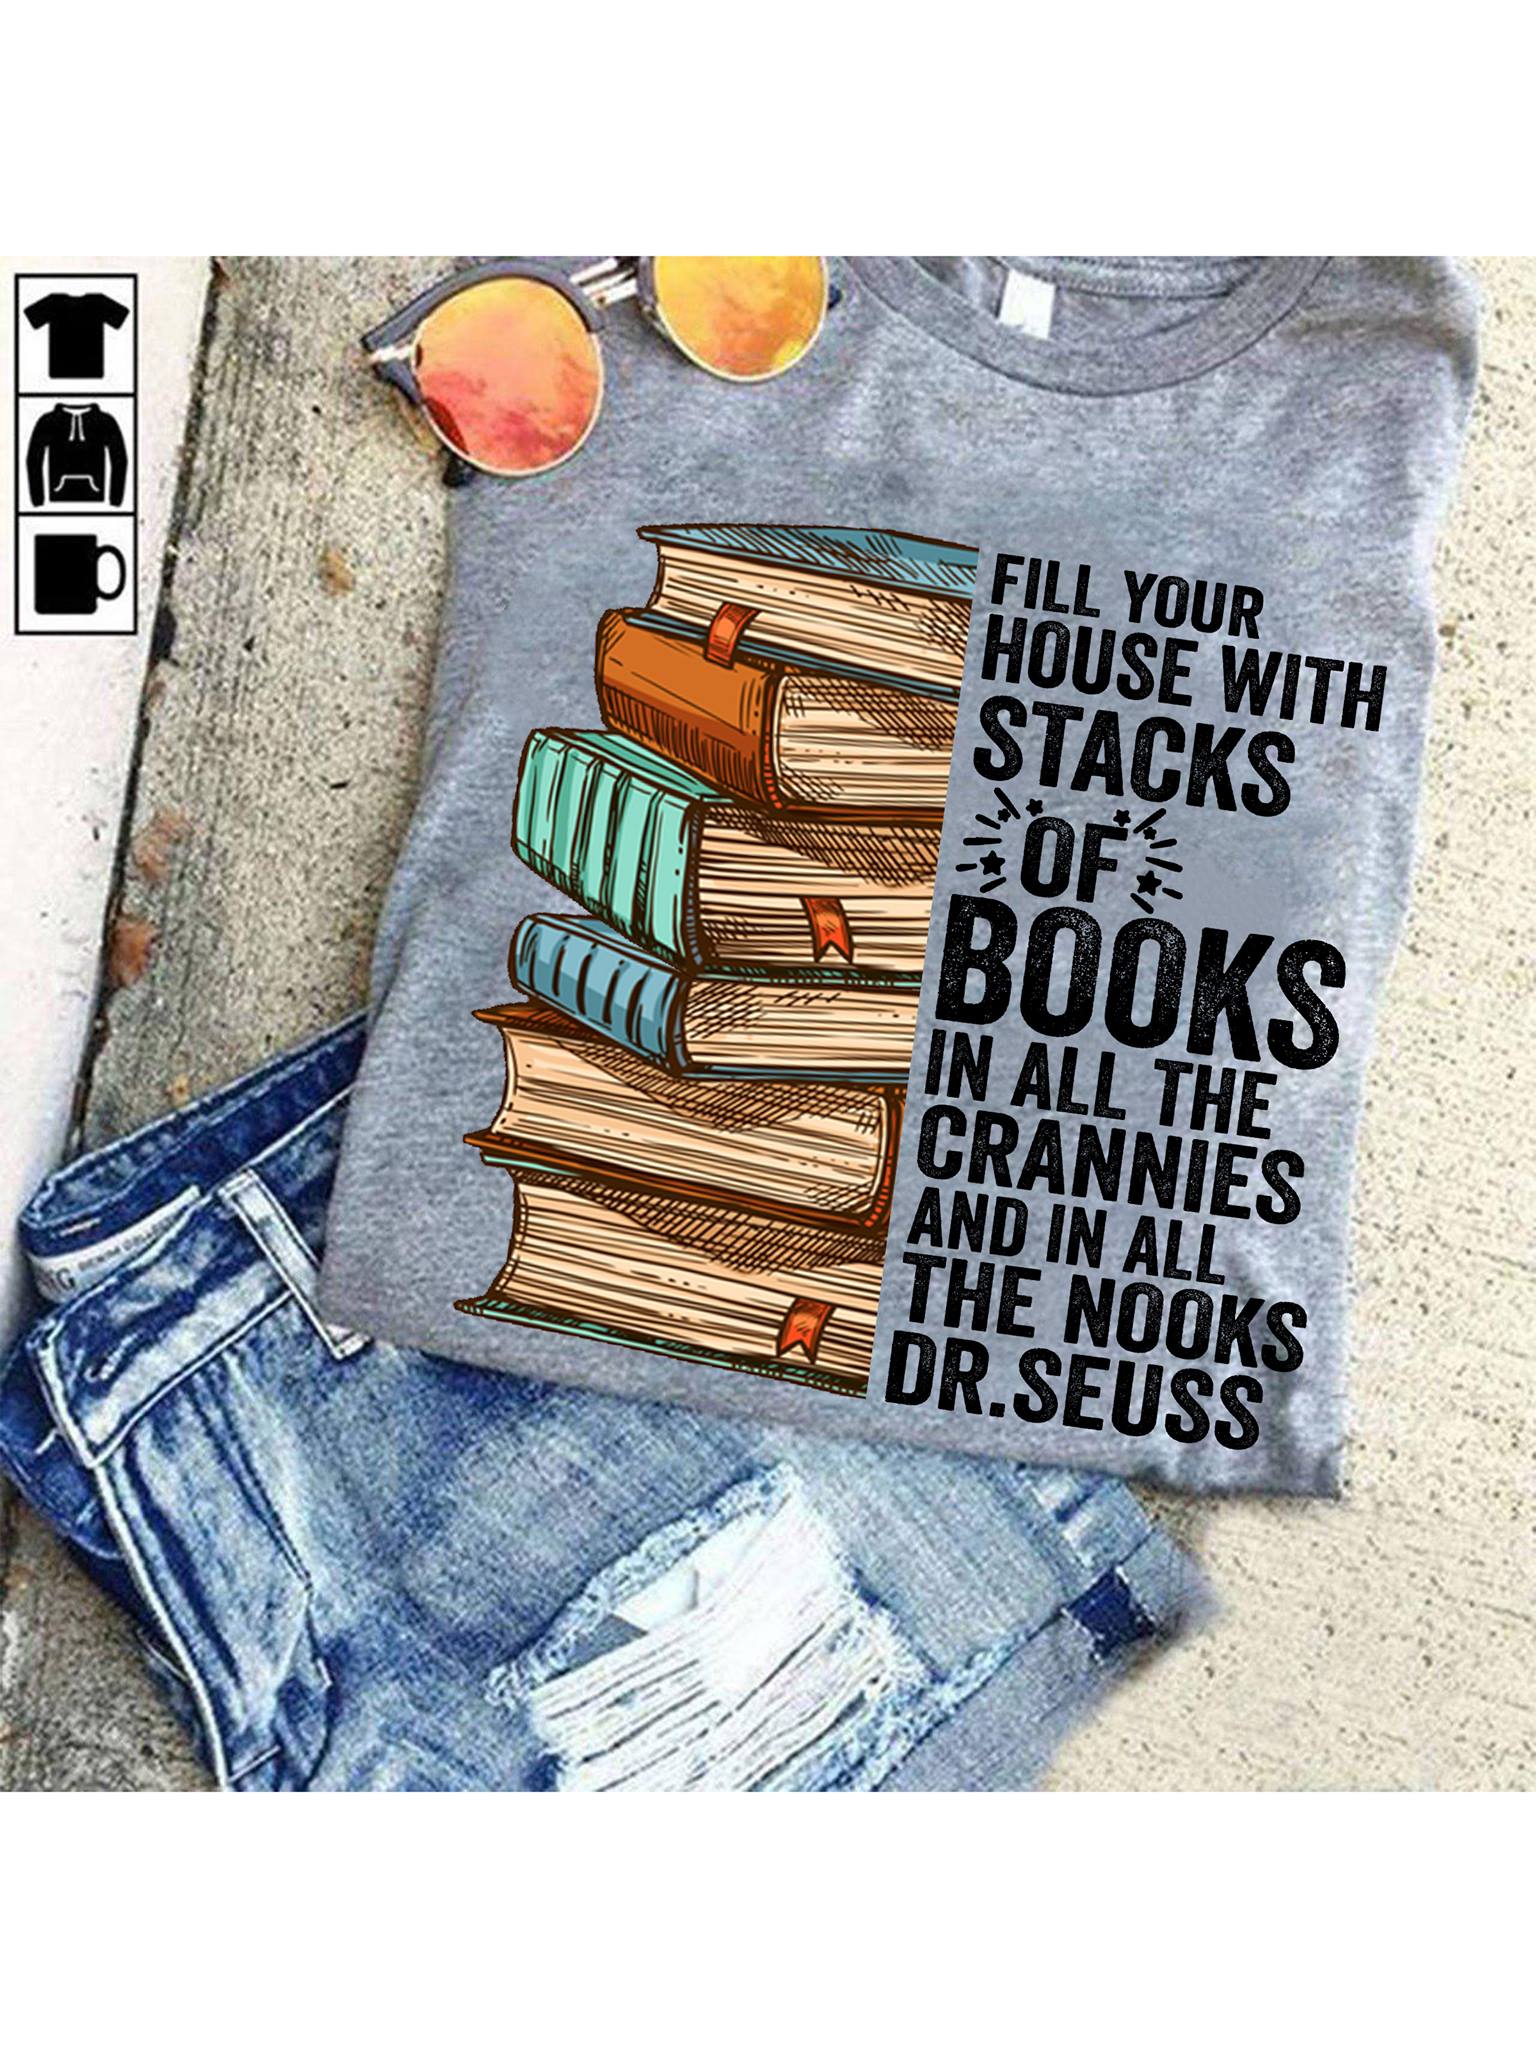 Fill your house with stacks of books in all the grannies and in all the nooks Dr.Seuss